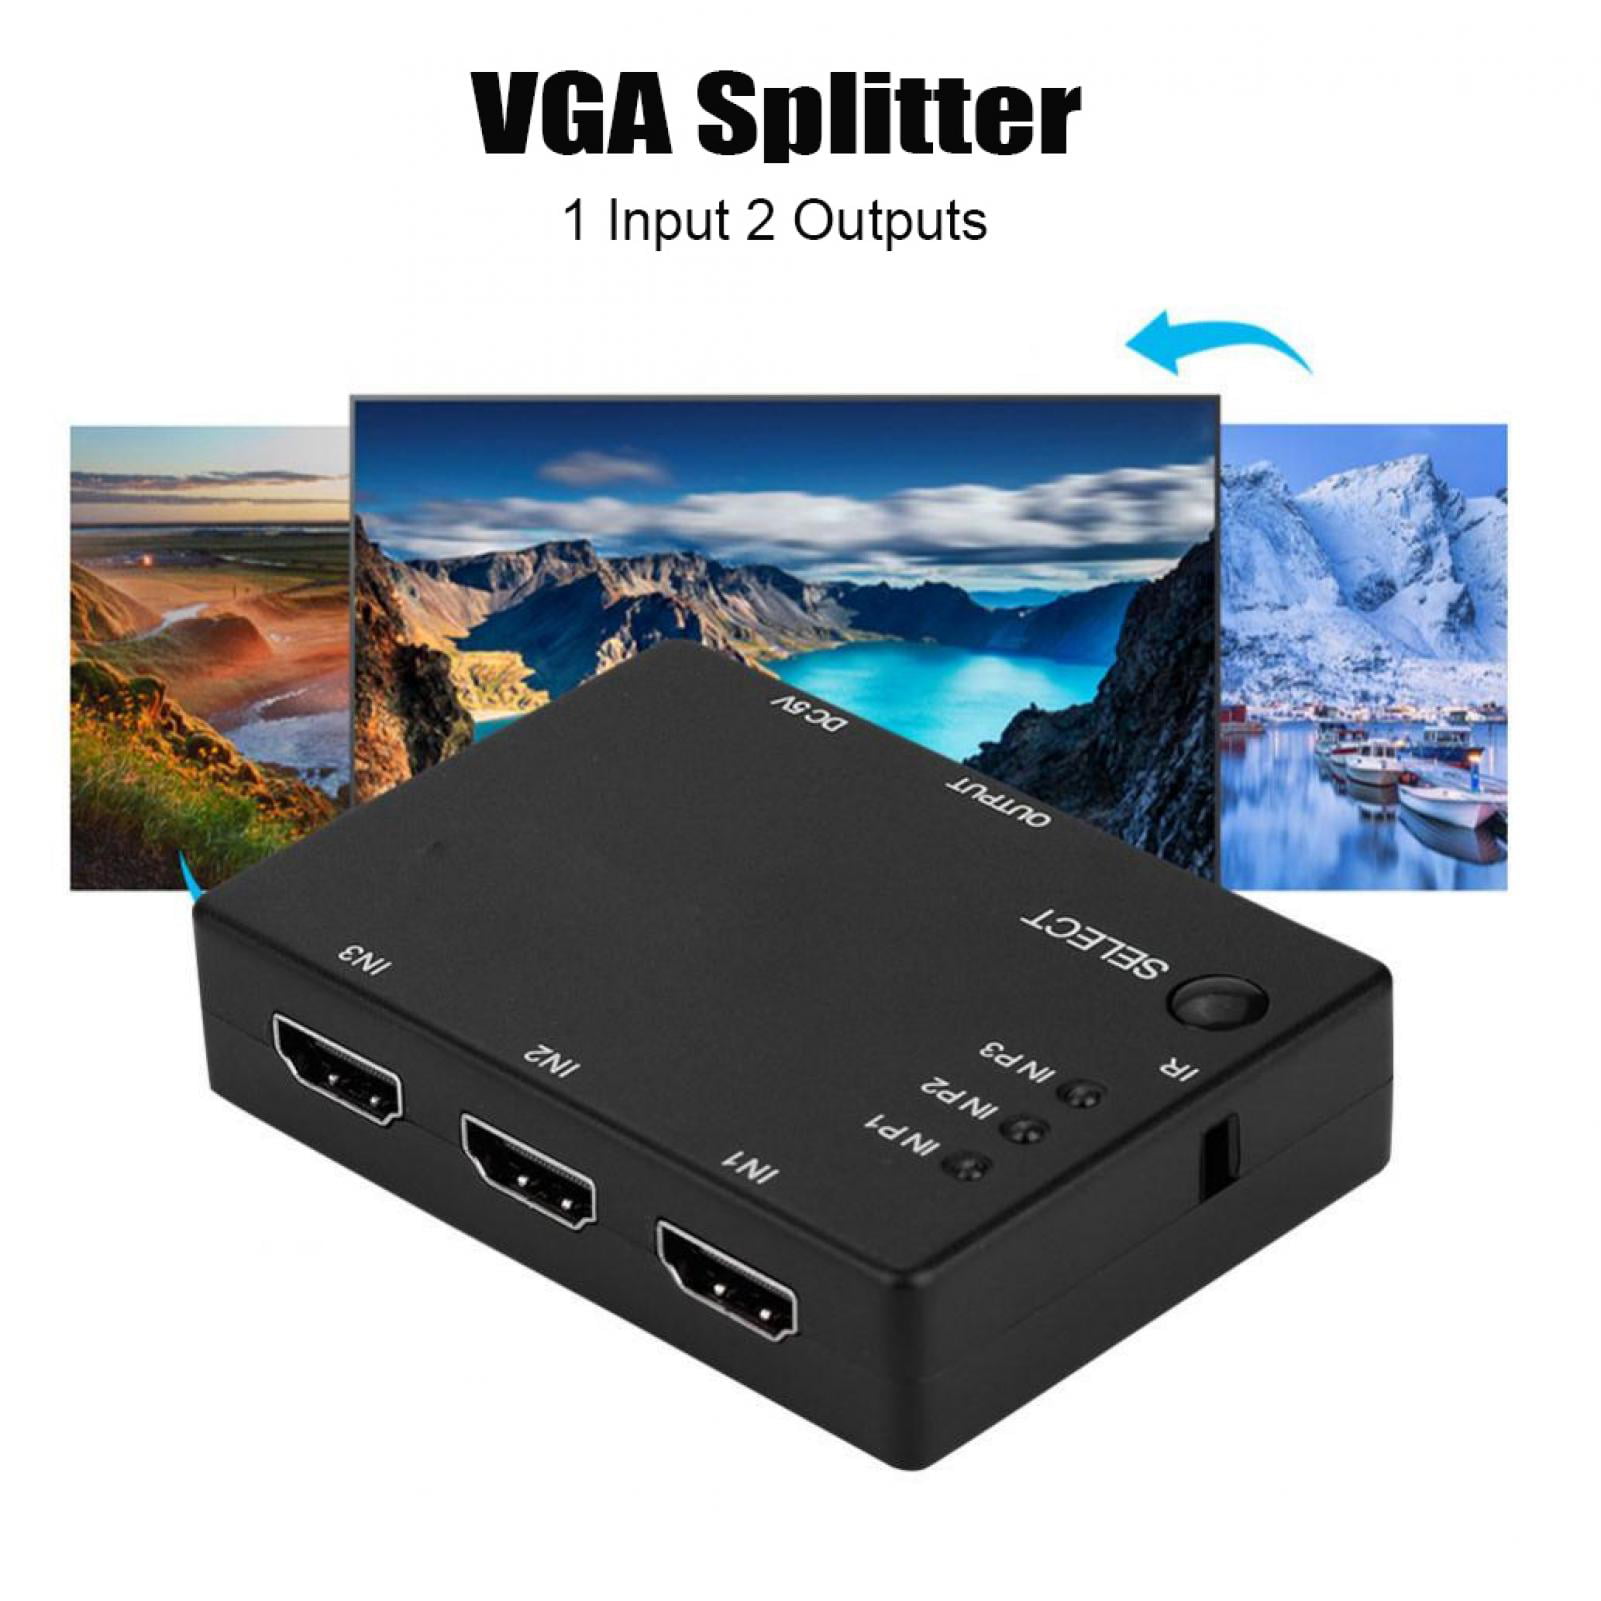 VGA Switch Box 2 en 1 Out VGA Switcher Splitter Data Synchronisation VGA Monitor Switch VGA Splitter Laptop Monitor 2 Port VGA Video Sharing Adapter 2 in 1 Out Manual Switcher for Computer